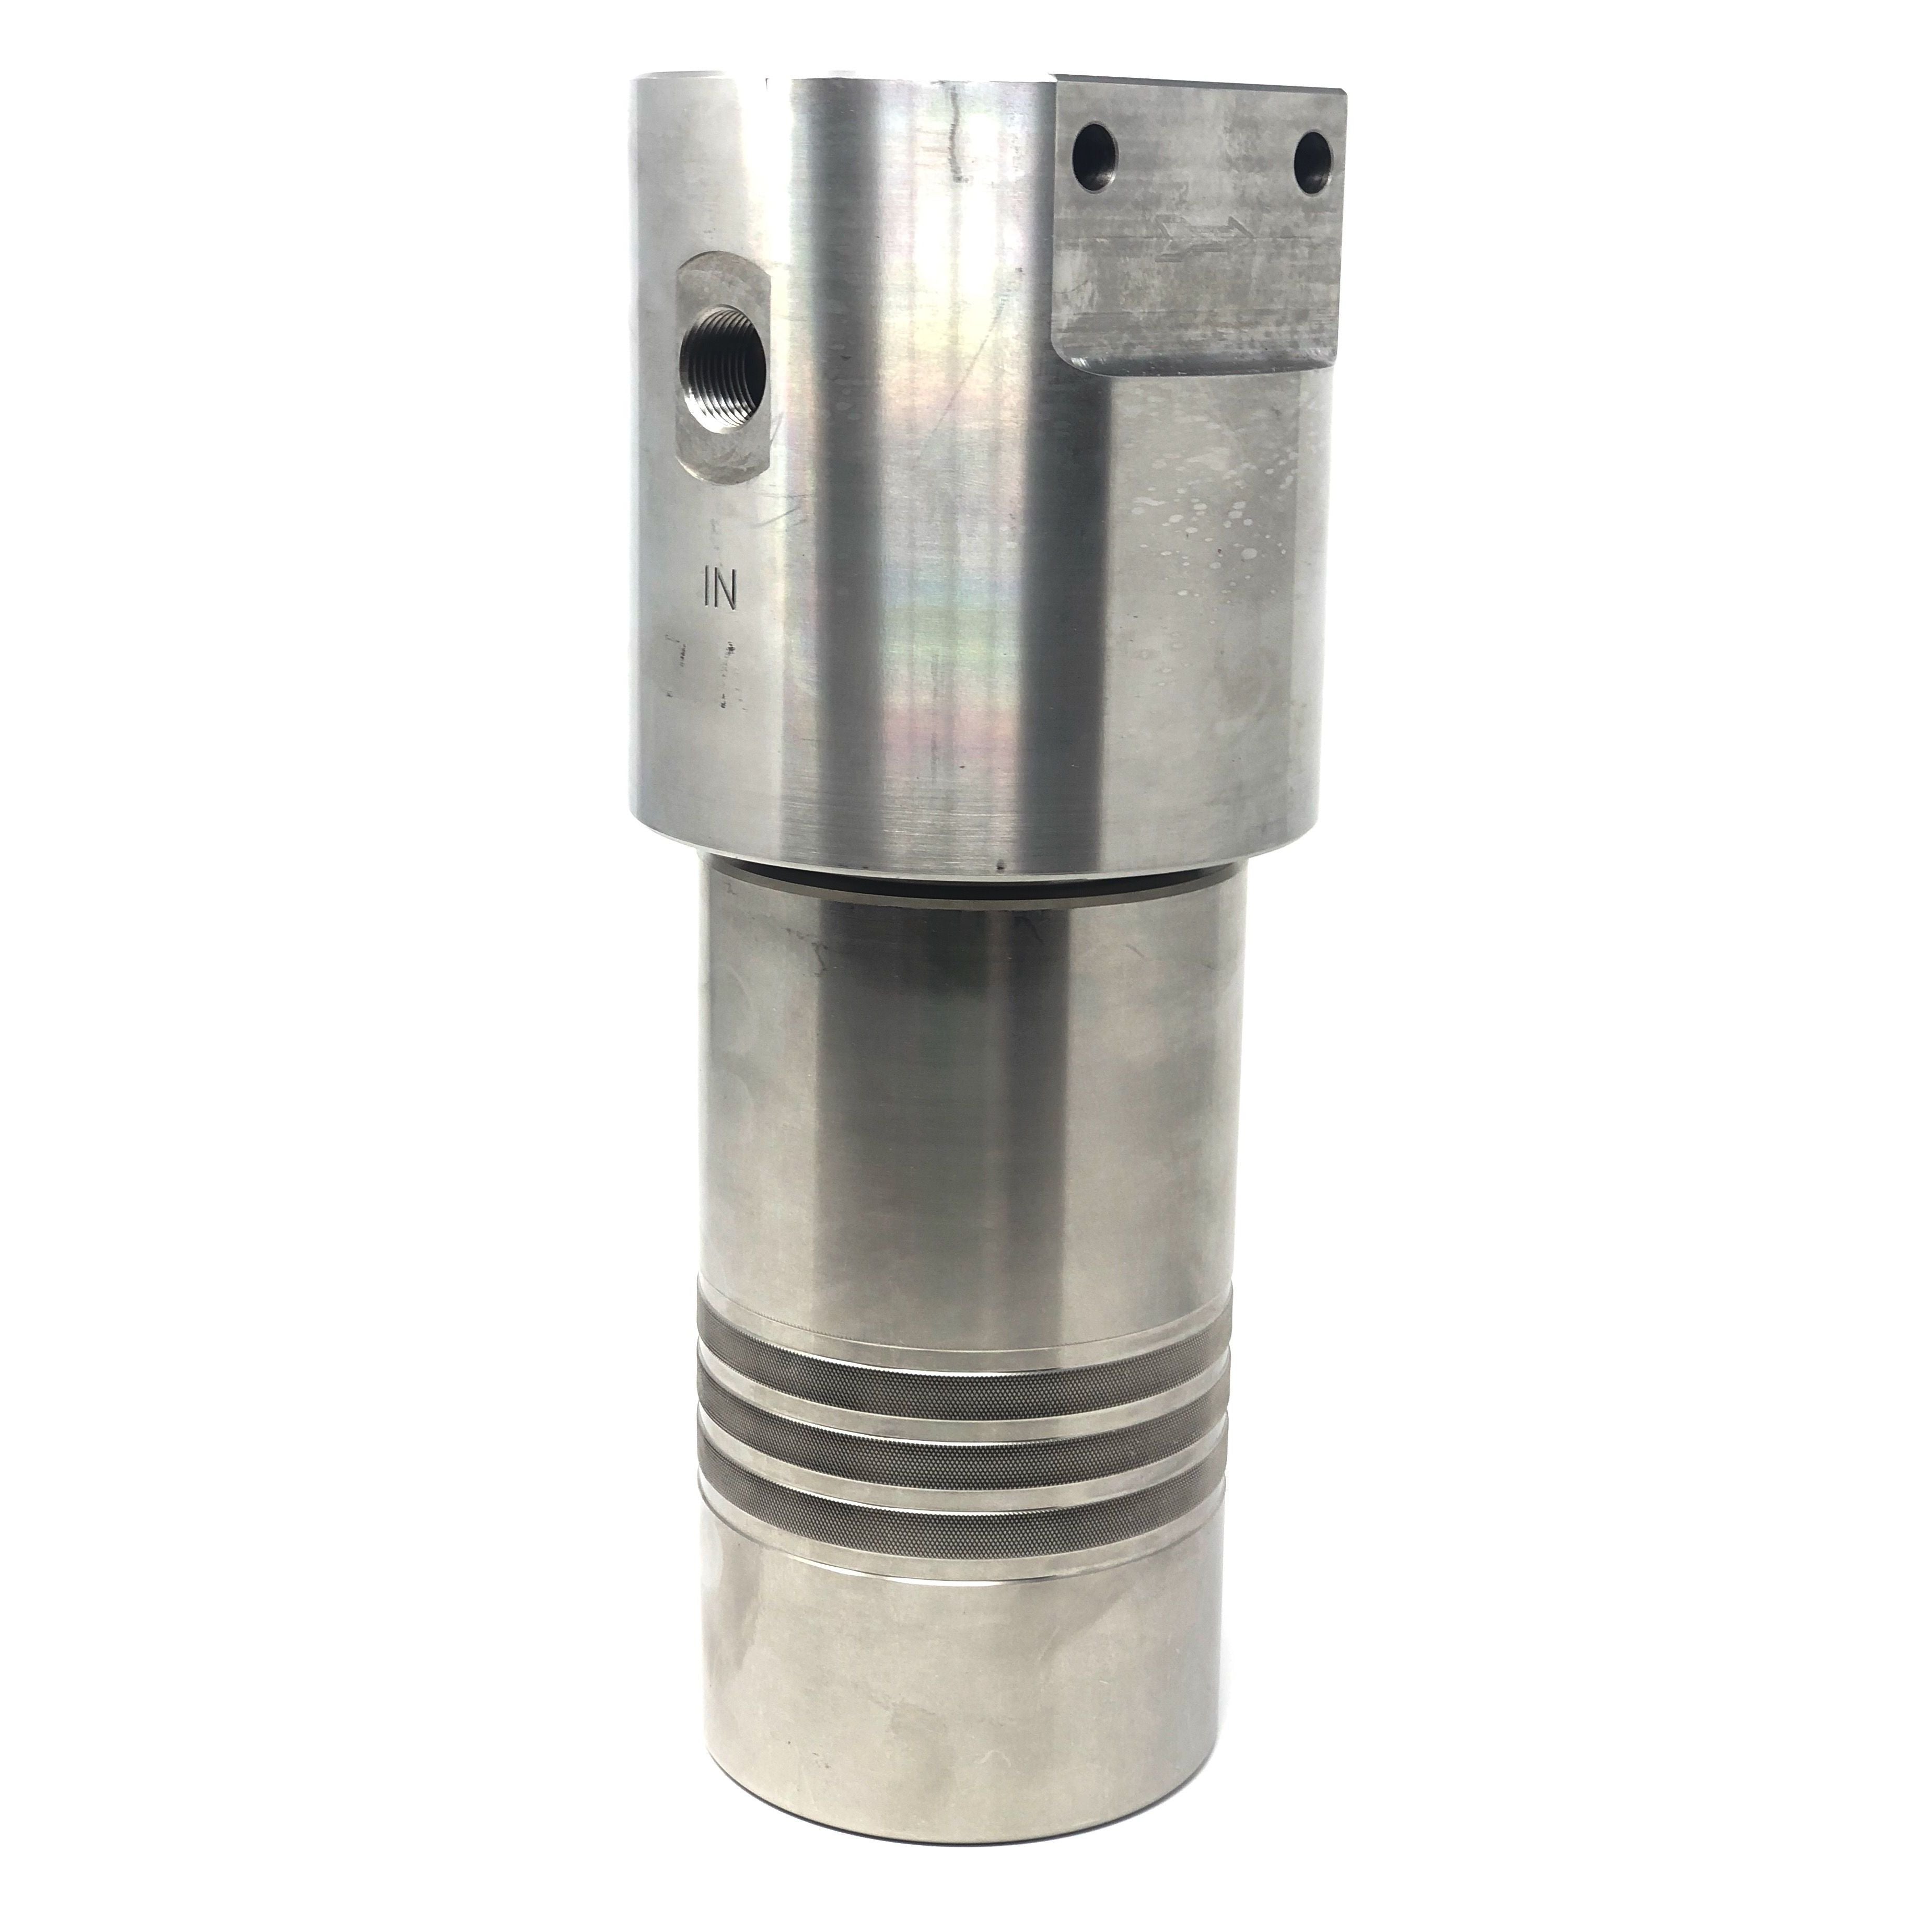 52S-244S-25SEN : Chase Ultra High Pressure Inline Filter, 10000psi, #4 SAE (1/4"), 25 Micron, With Visual Indicator, No Bypass